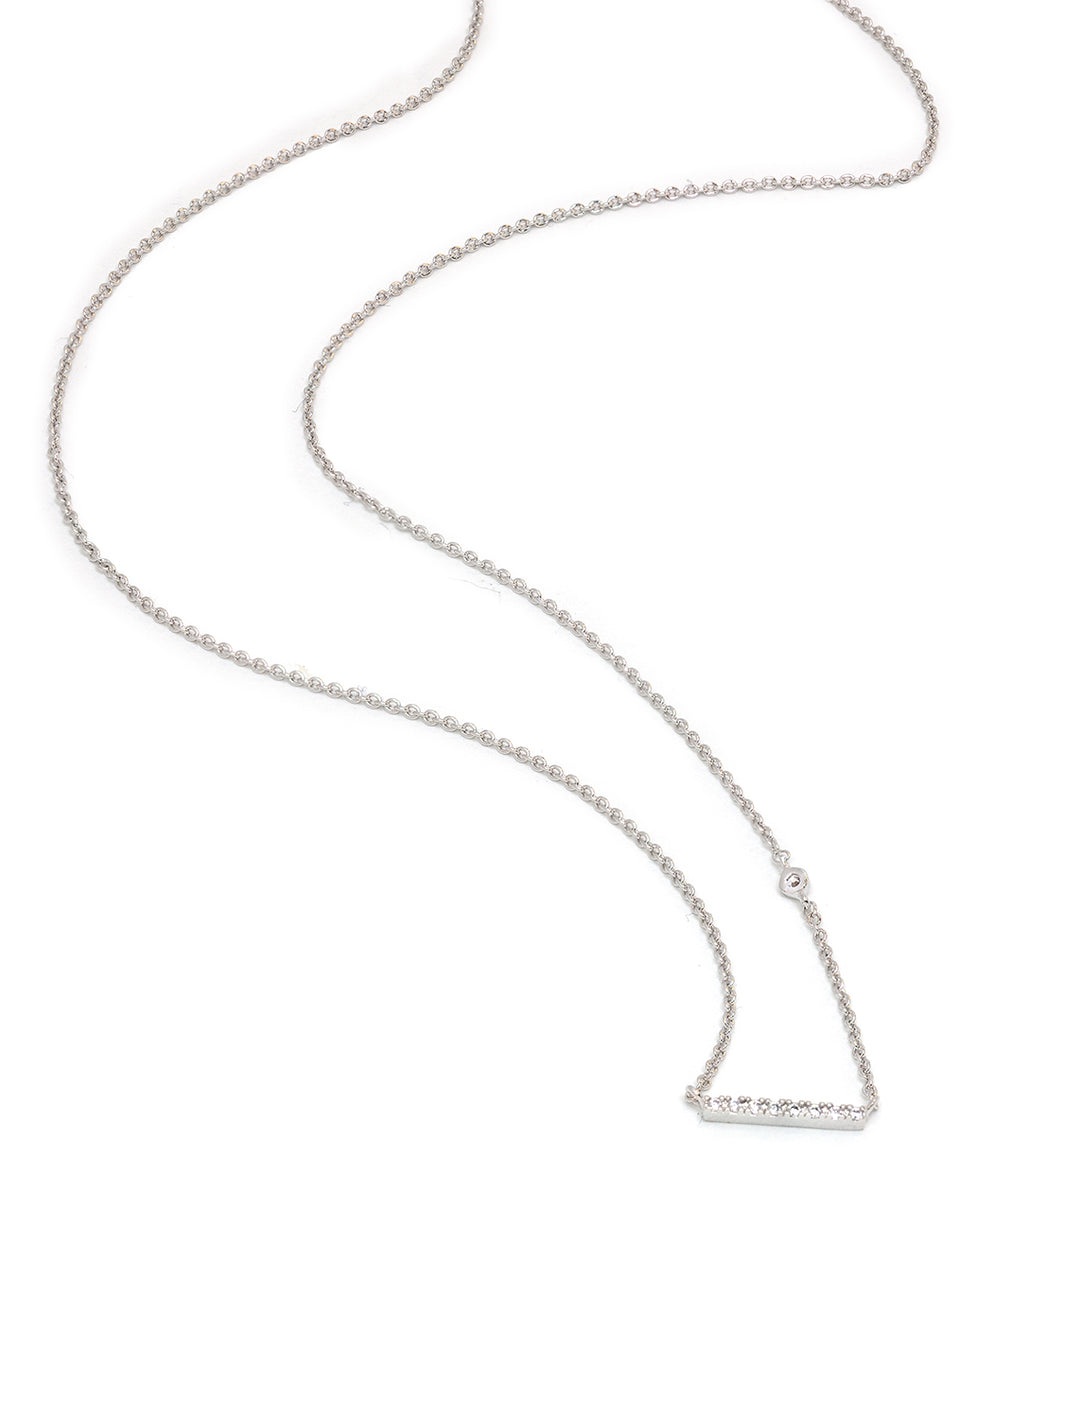 Stylized laydown of Tai's horizontal bar necklace in silver with cz.